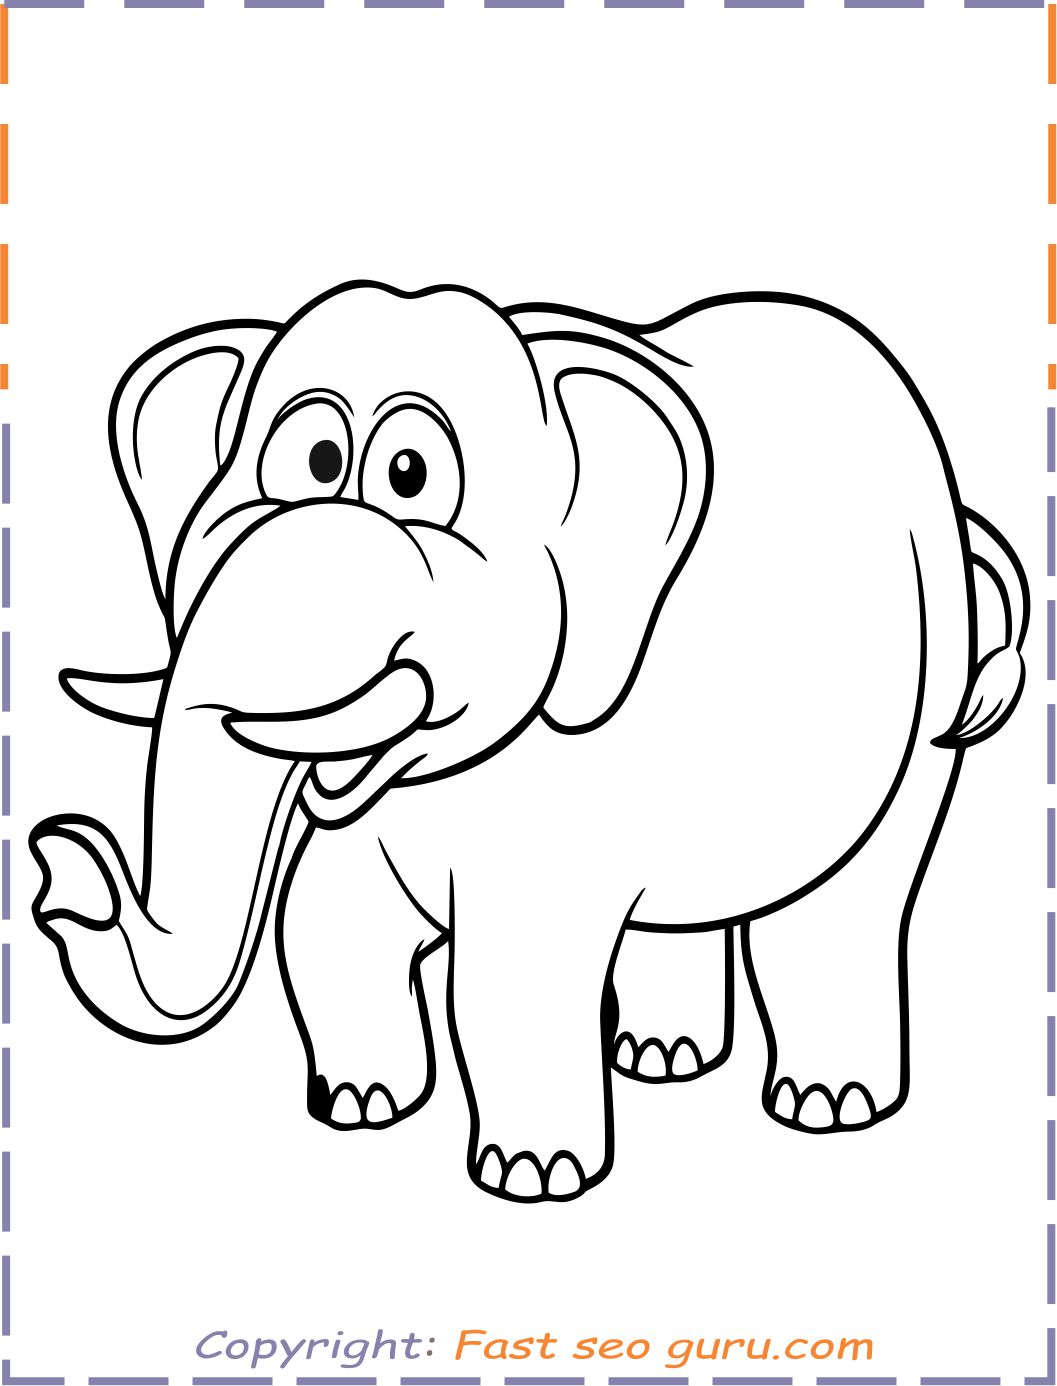 Elephant colouring pages to print